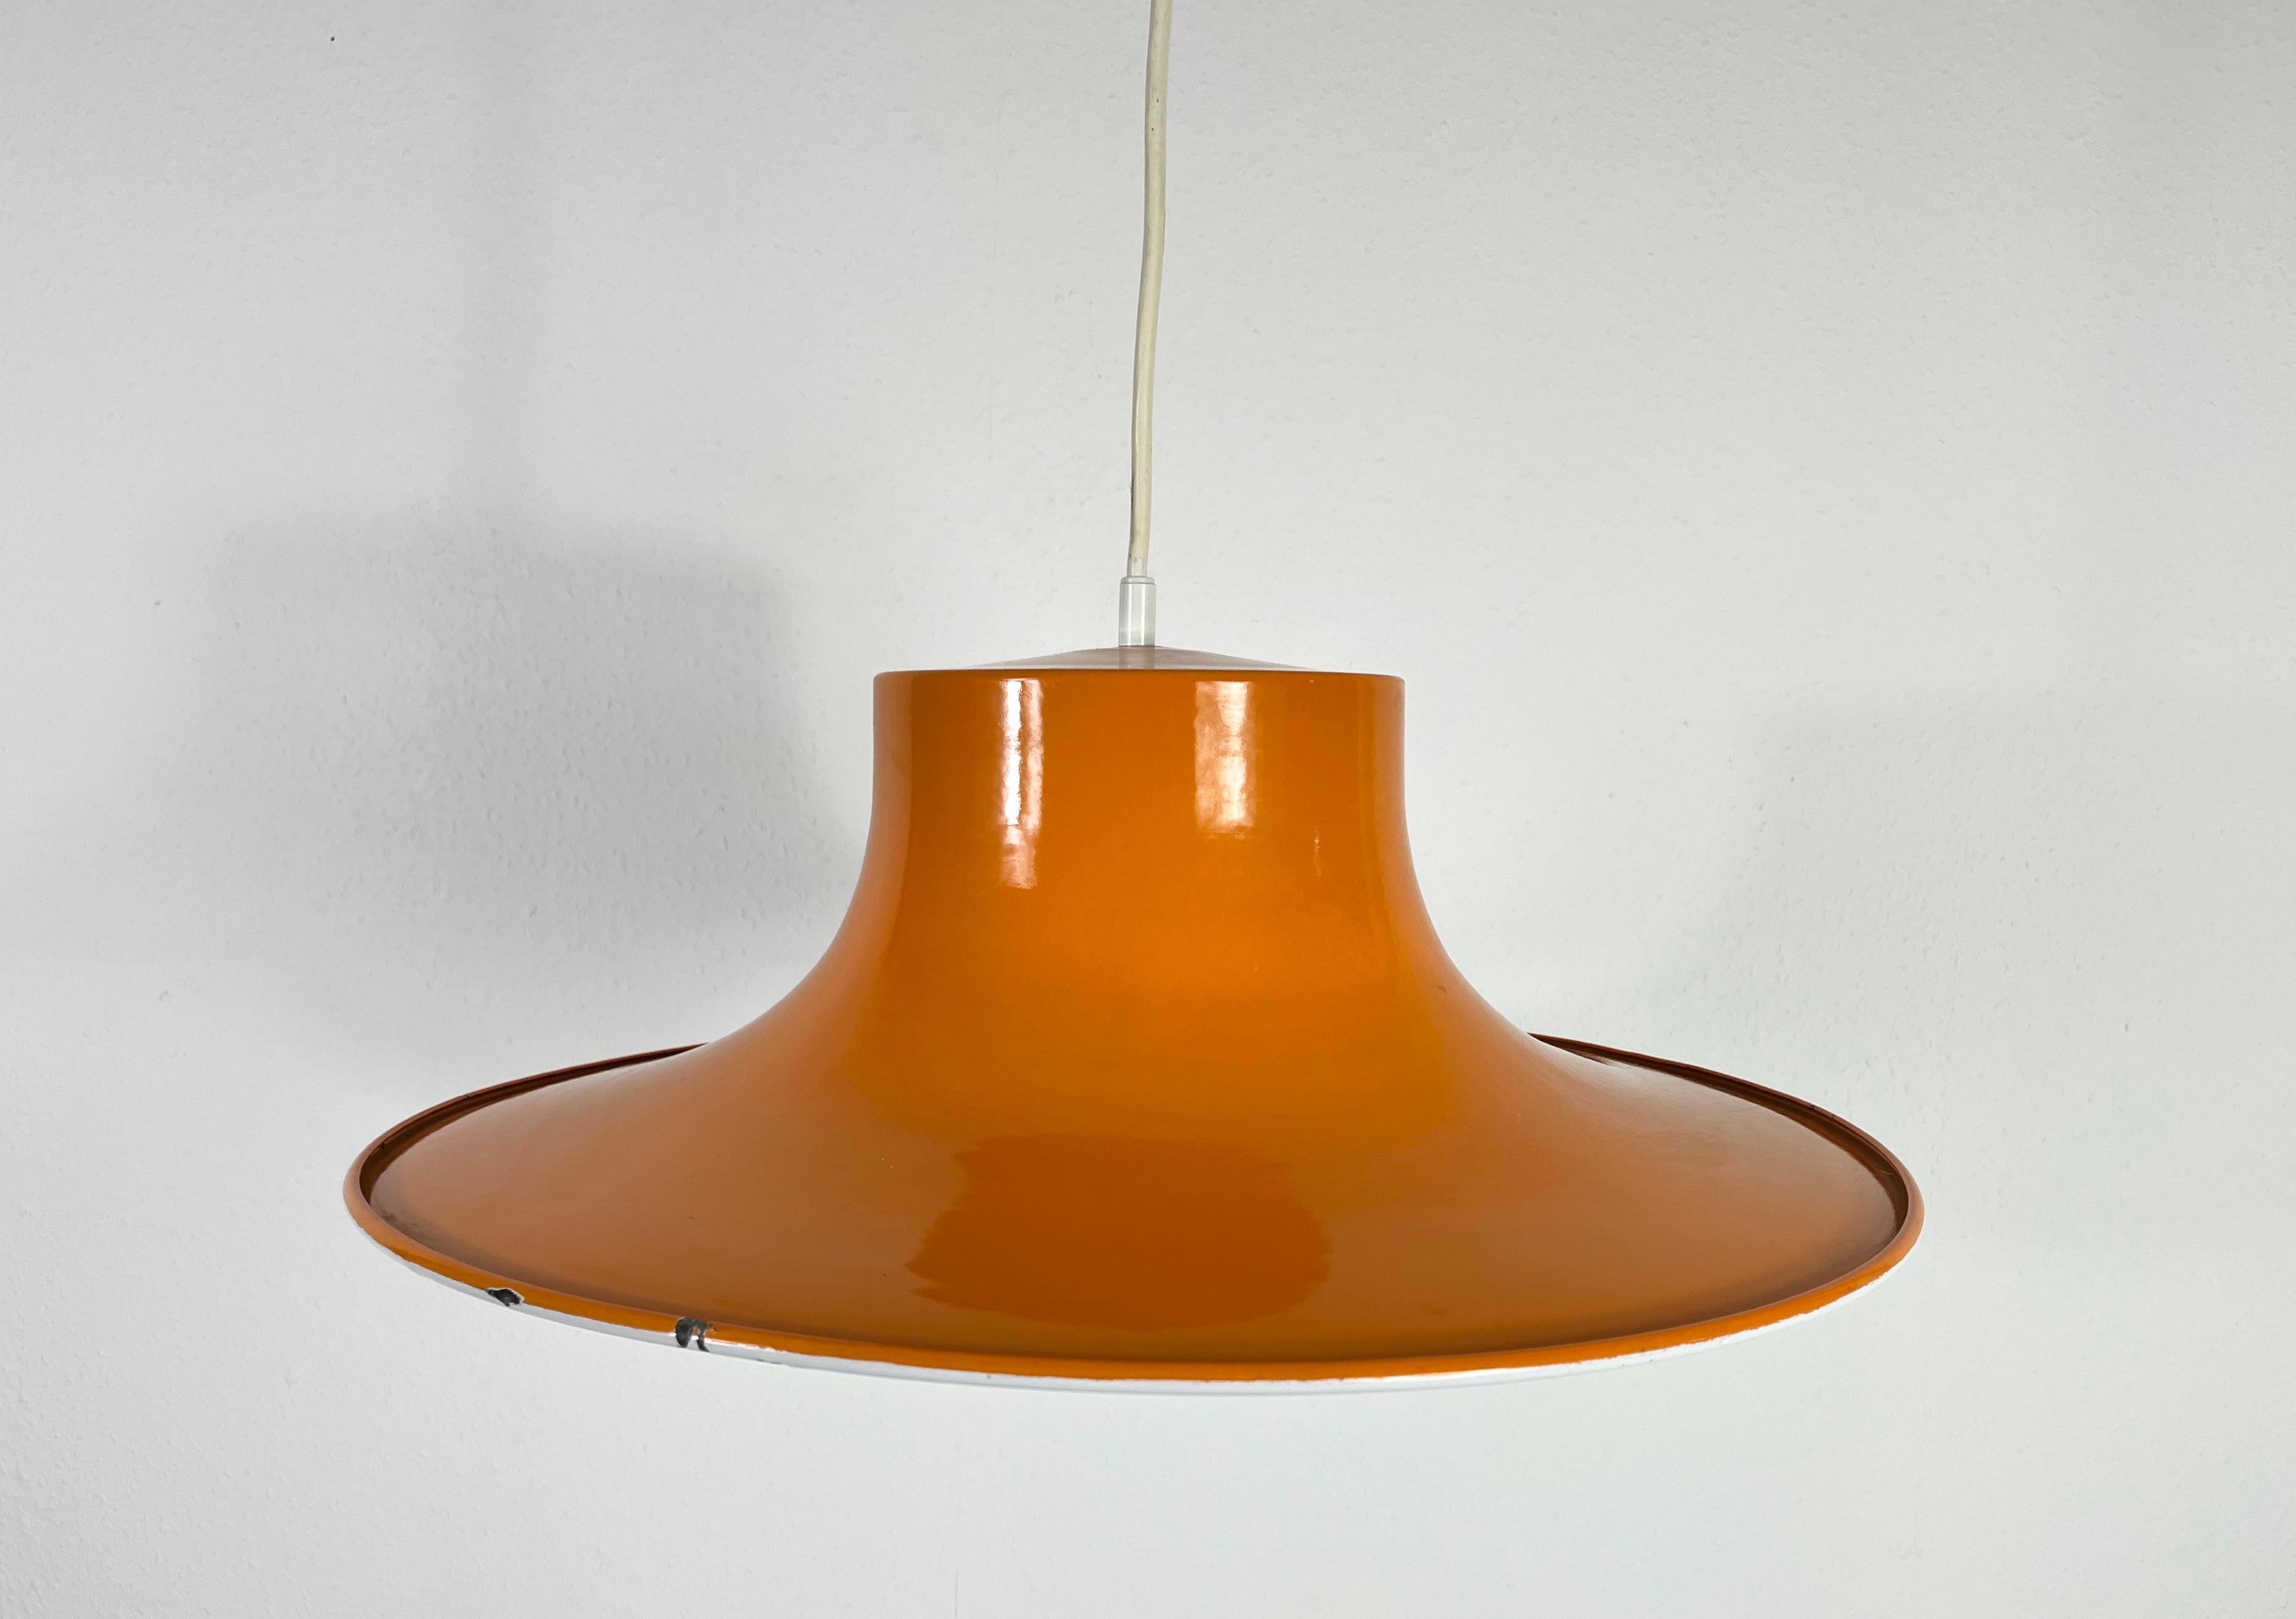 Plastic Space Age Orange Pendant Lamp by Erco, Germany, 1970s For Sale